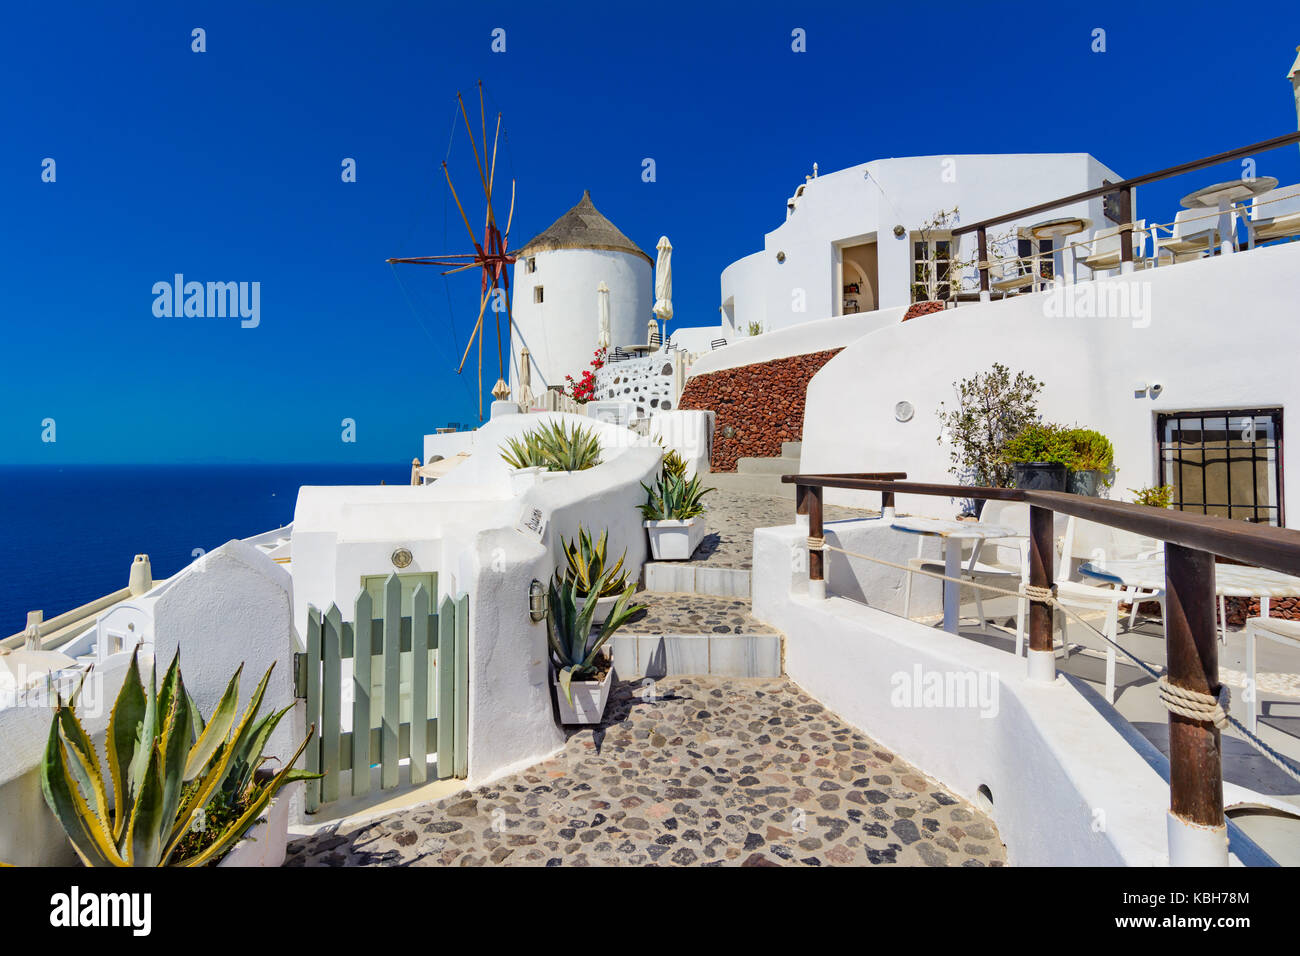 Oia town, Santorini island, Greece. Famous windmills on cliff, cobled streets and white houses over the Caldera, Aegean sea. Stock Photo